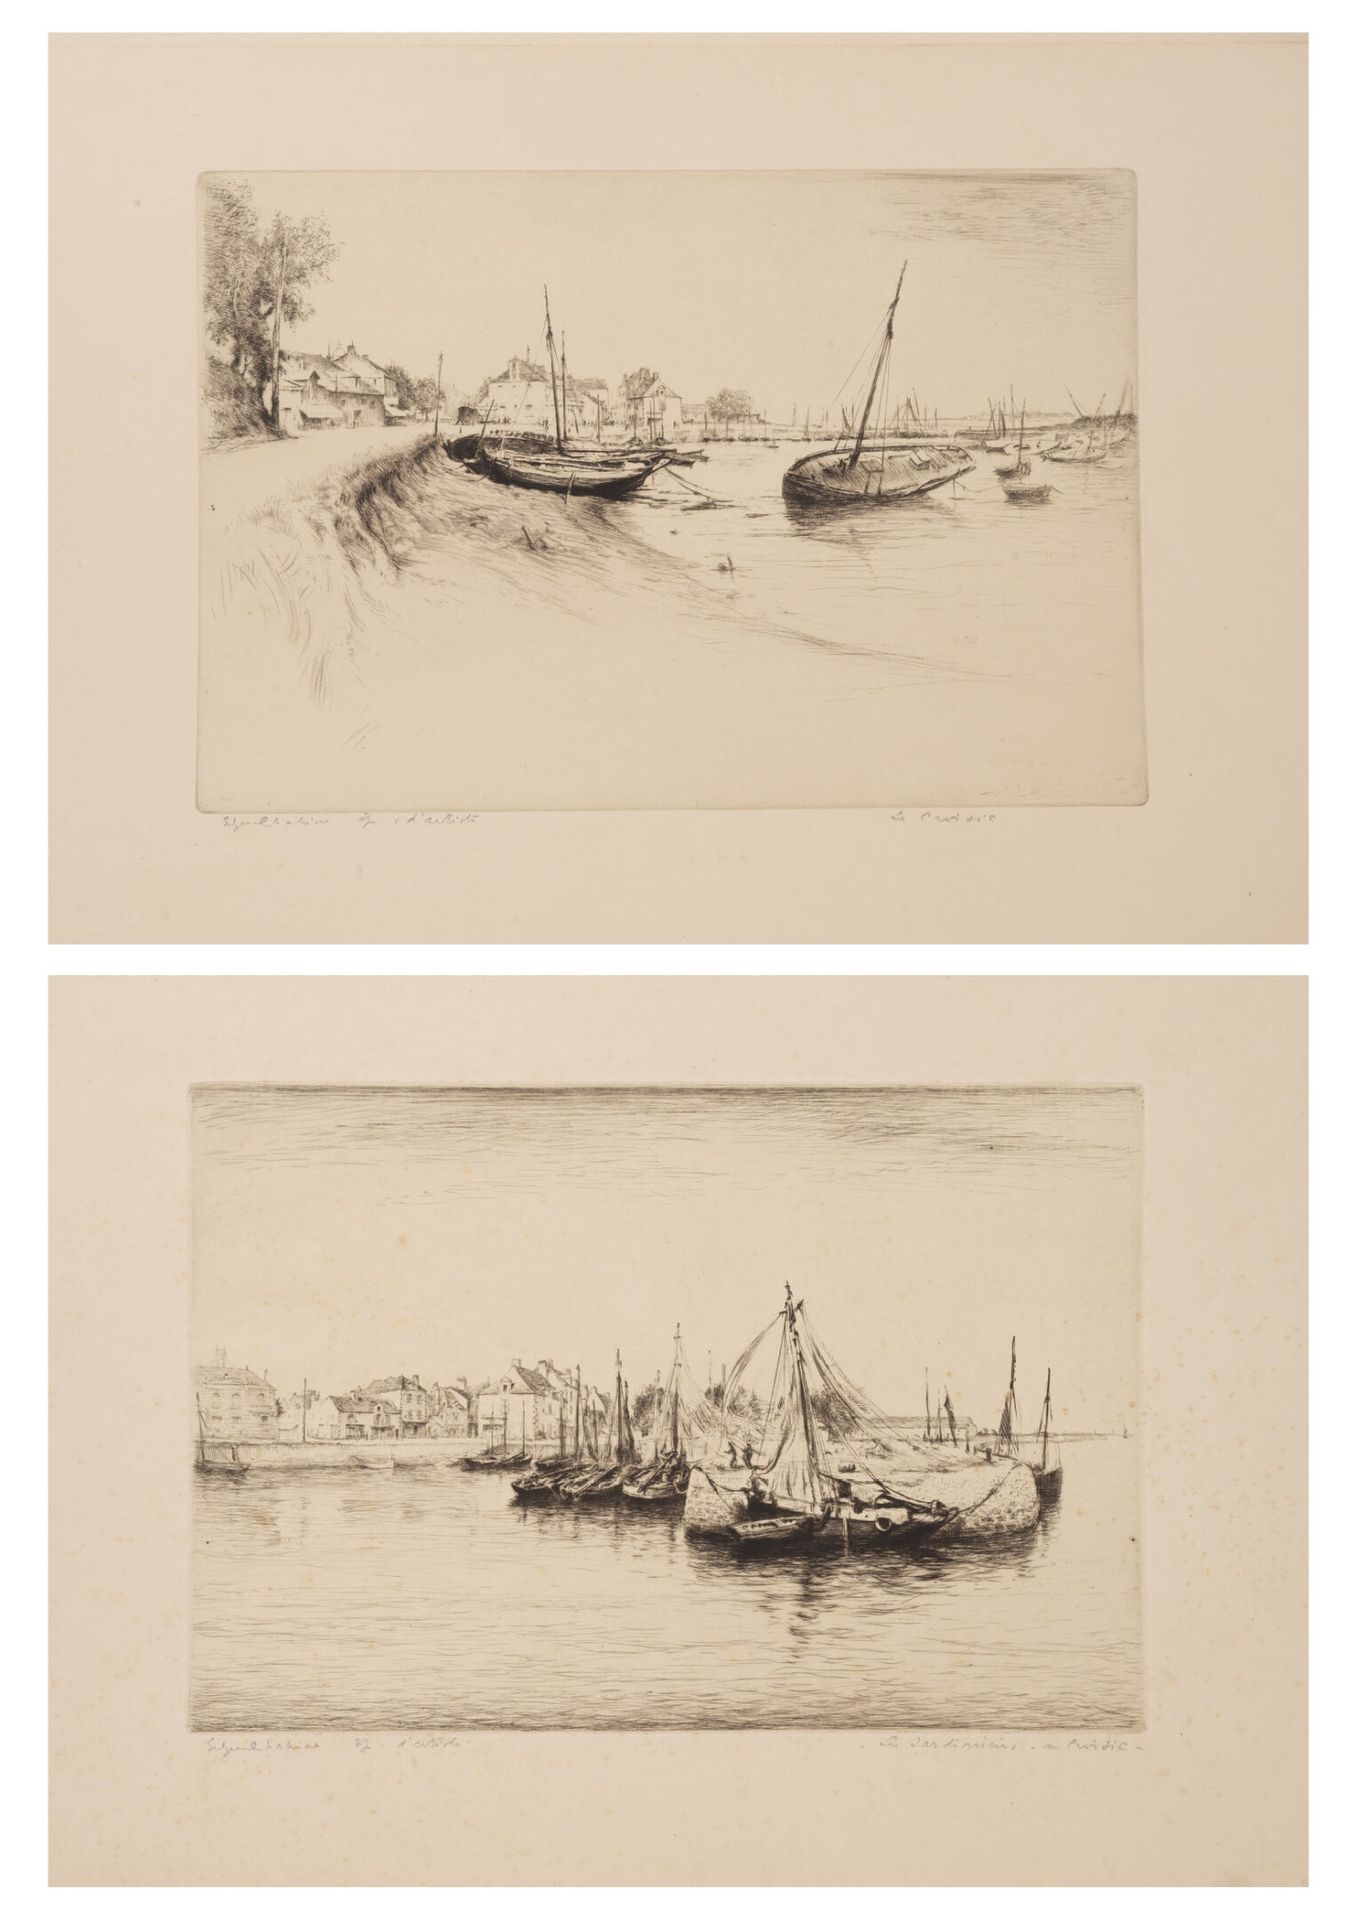 Edgar CHAHINE (1874-1947) Le Croisic, 1931.

Drypoint on paper.

Artist's proof.&hellip;